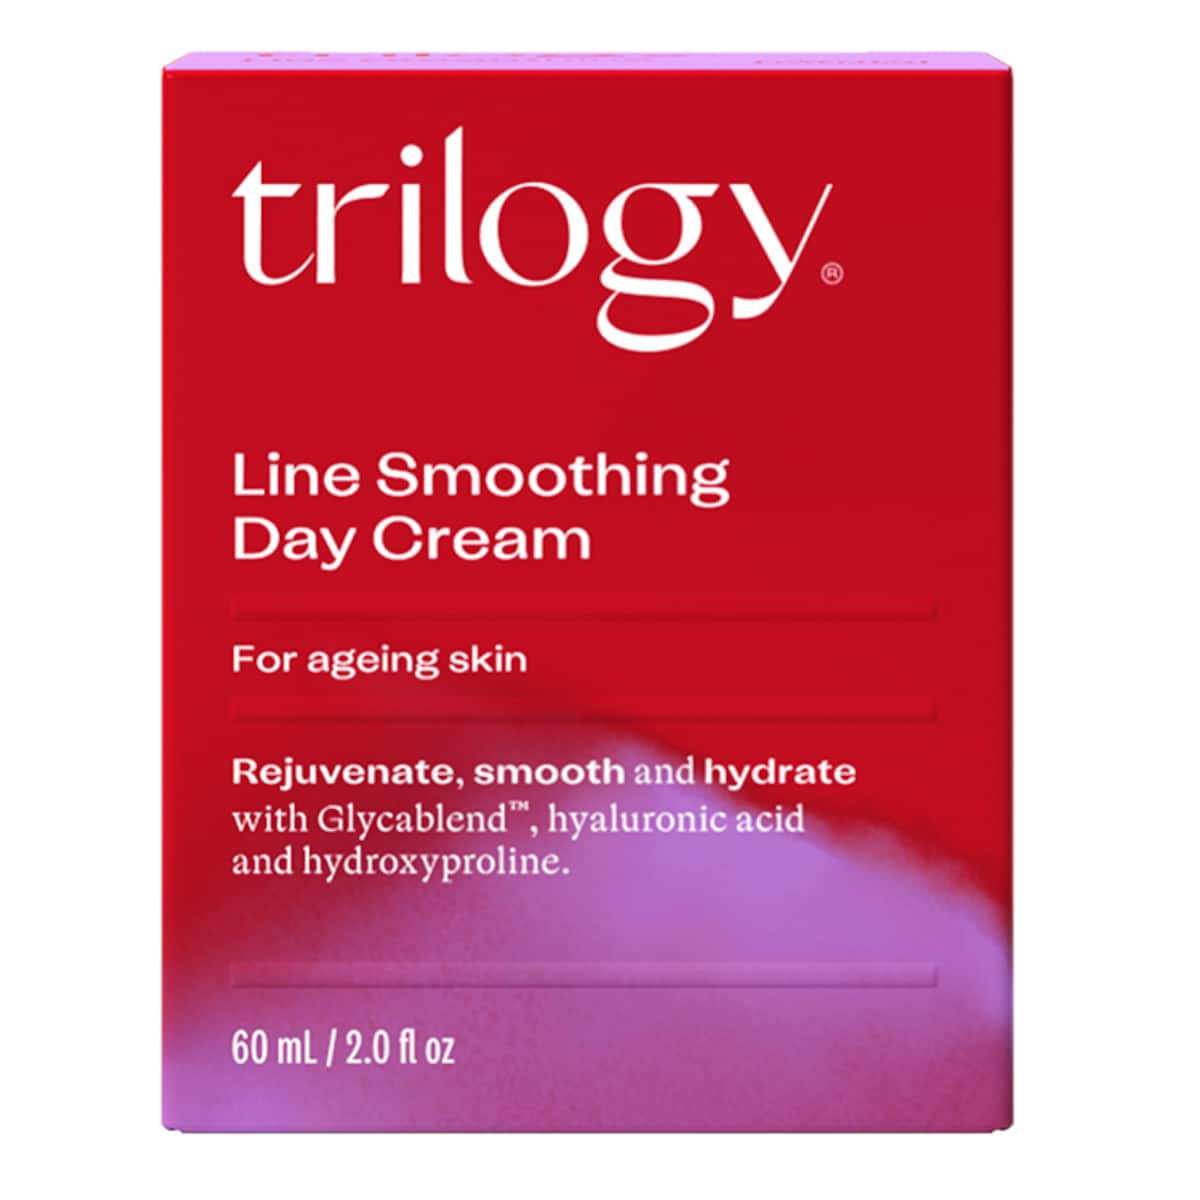 Trilogy Line Smoothing Day Cream 60ml 